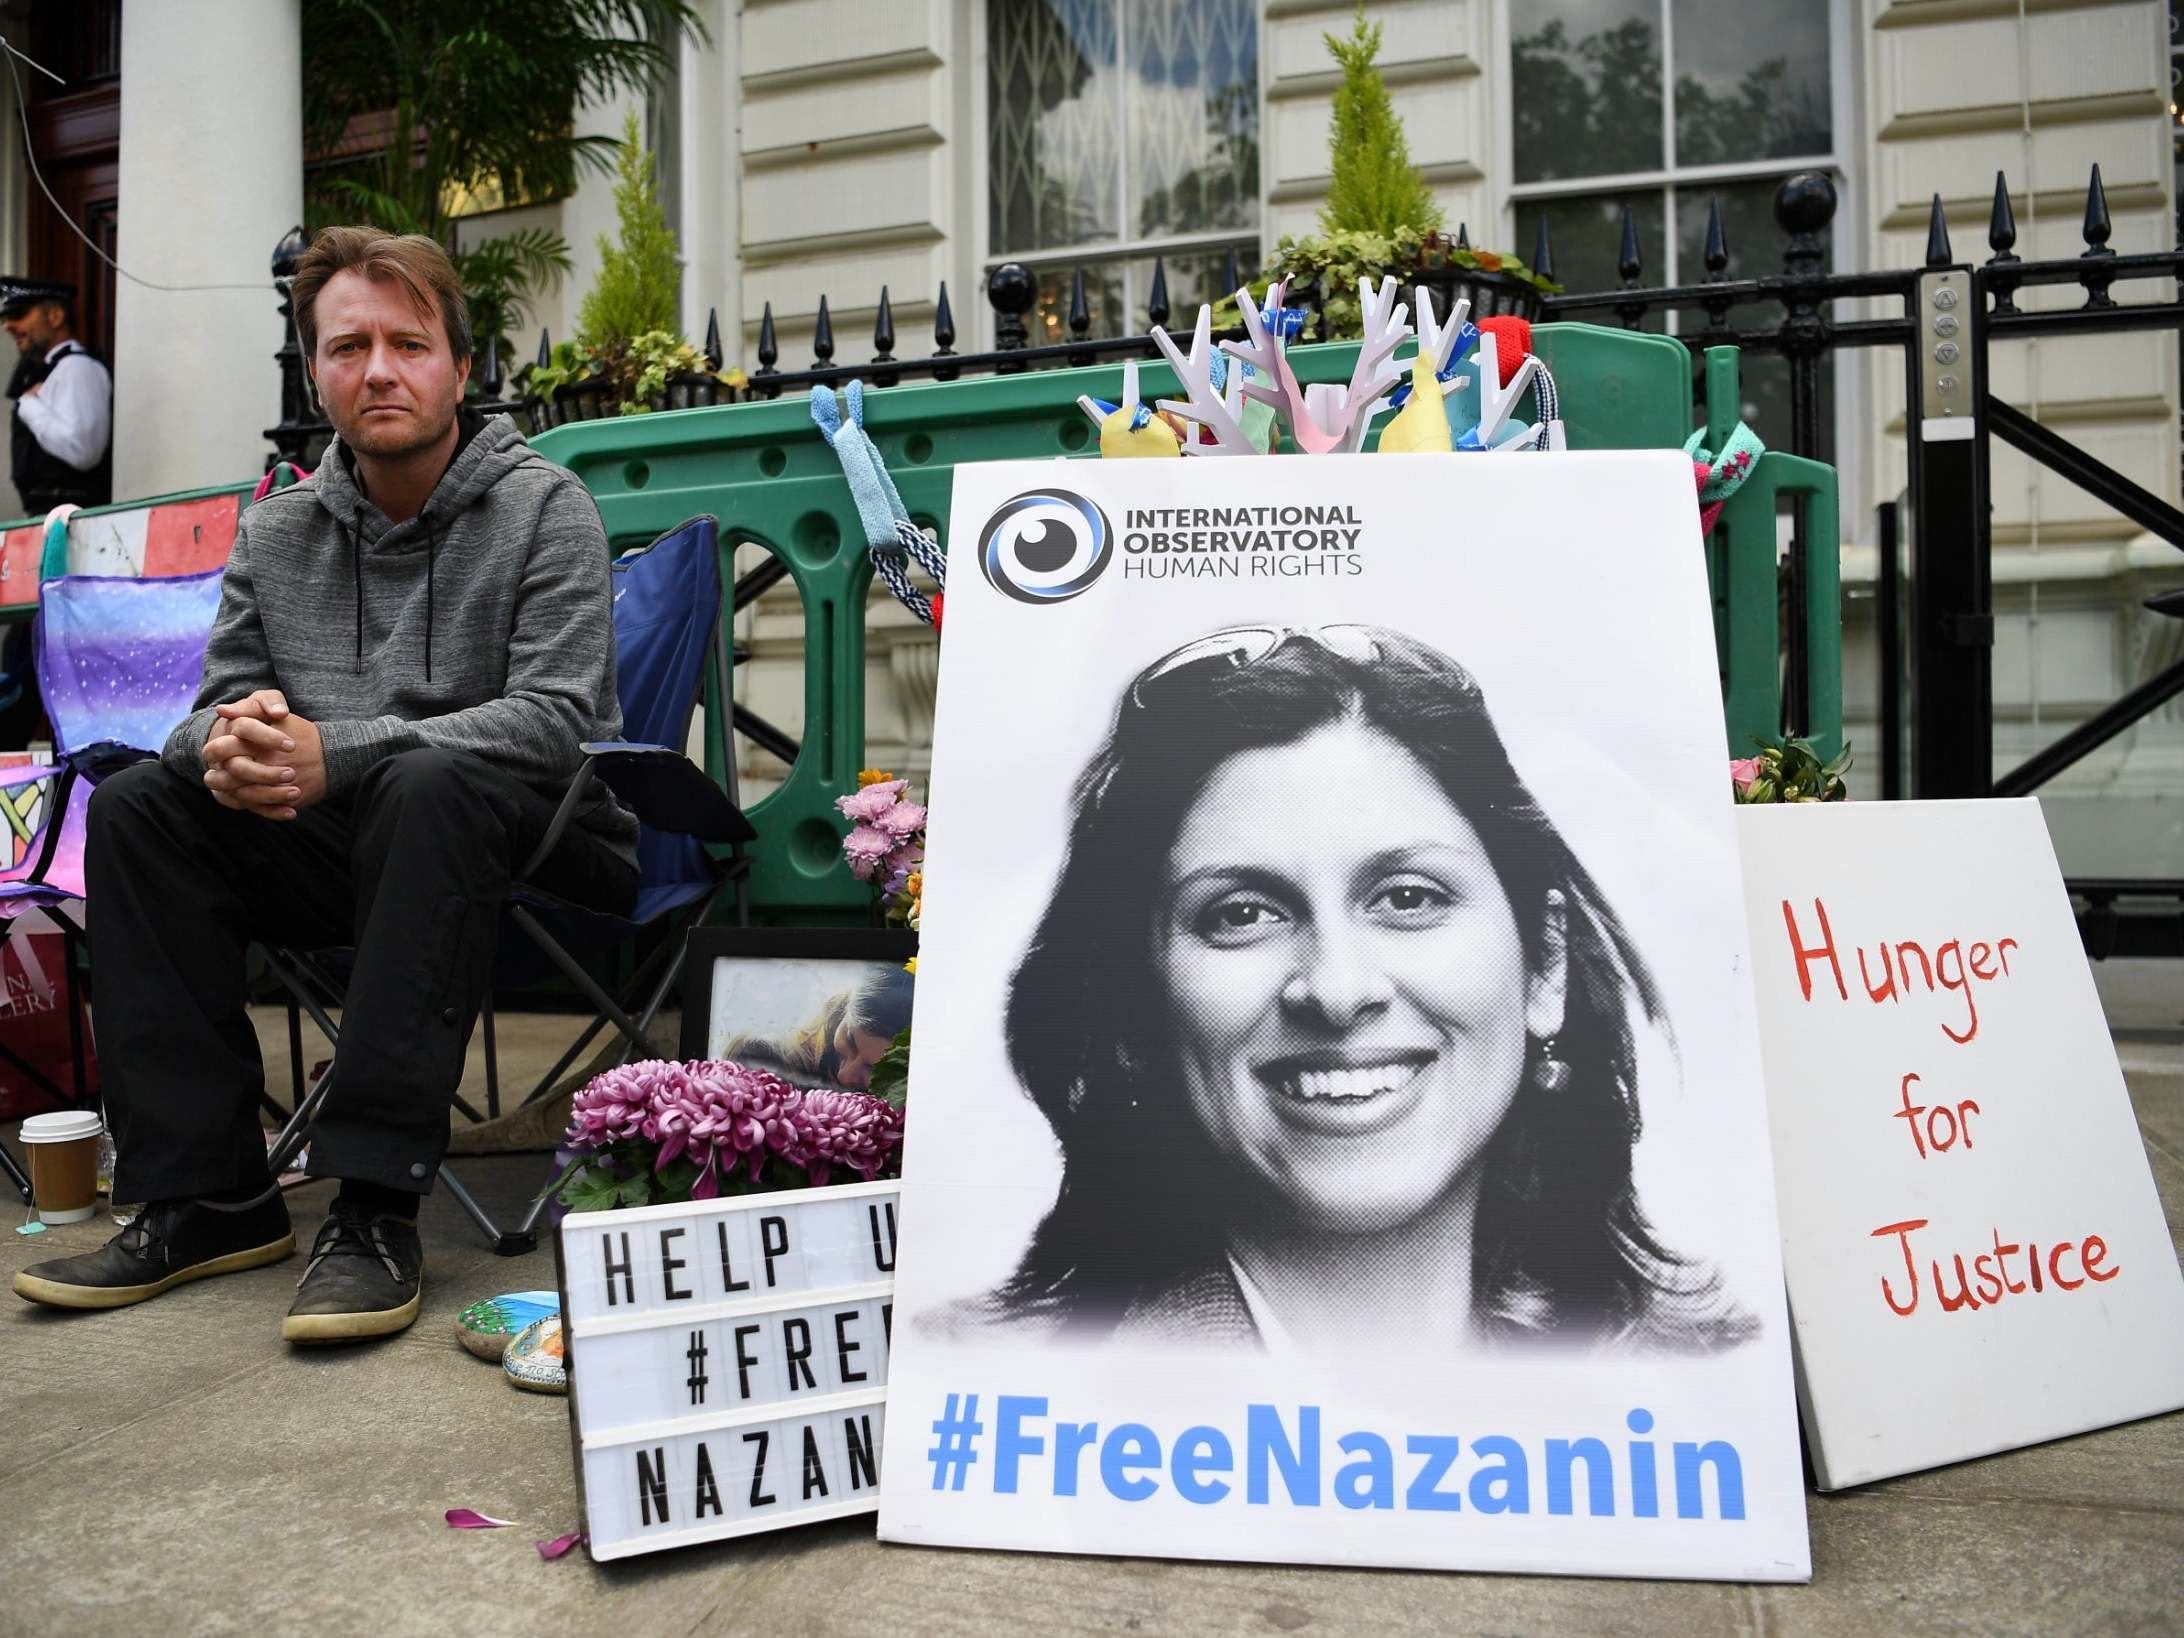 Richard Ratcliffe, the husband of imprisoned Nazanin Zaghari-Ratcliffe, said his wife had been chained to a bed in solitary confinement